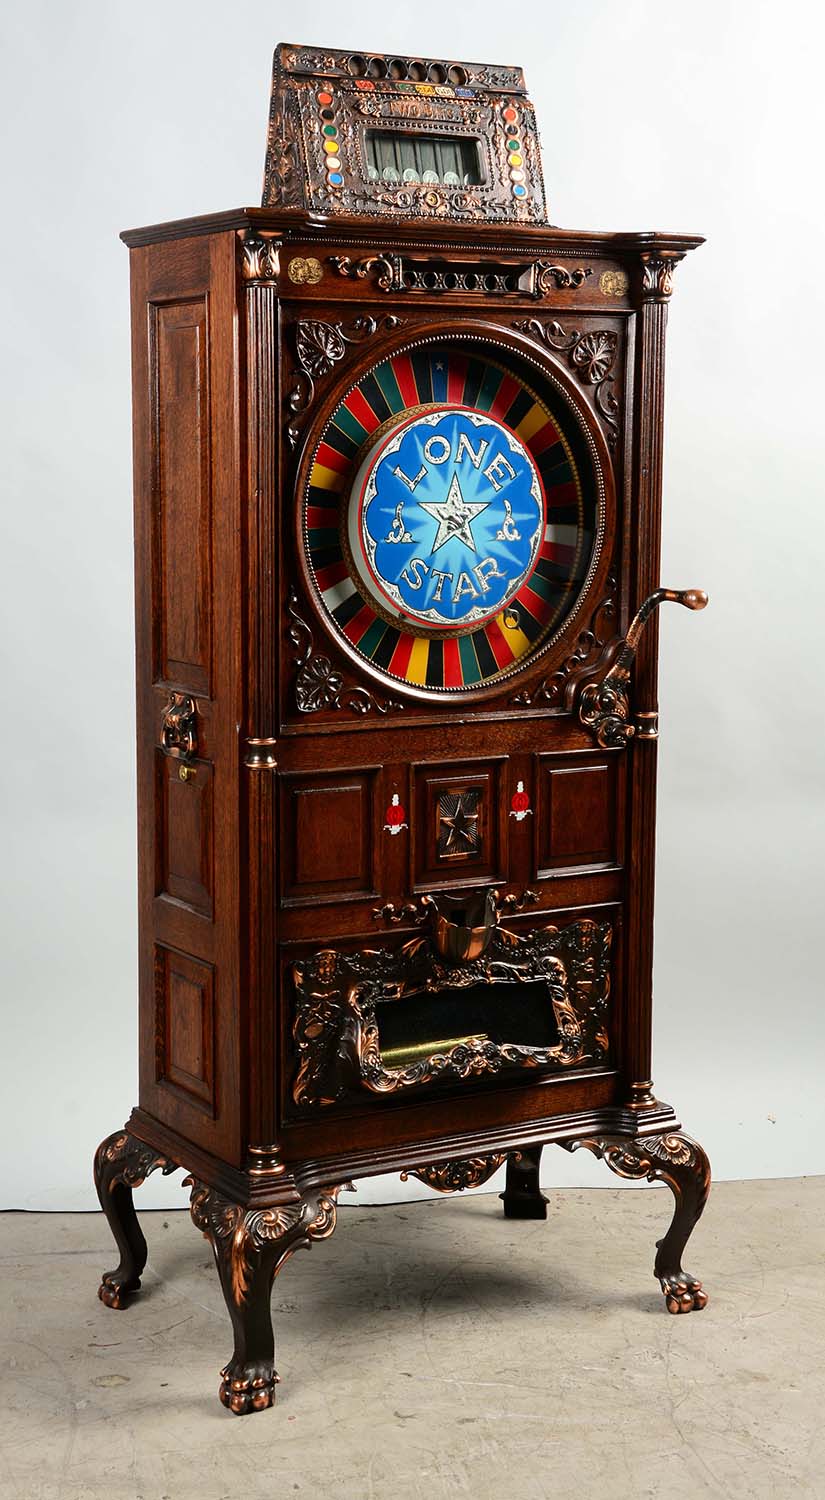 25¢ Mills Lone Star with Music Upright Slot Machine, Estimated at $40,000-60,000.